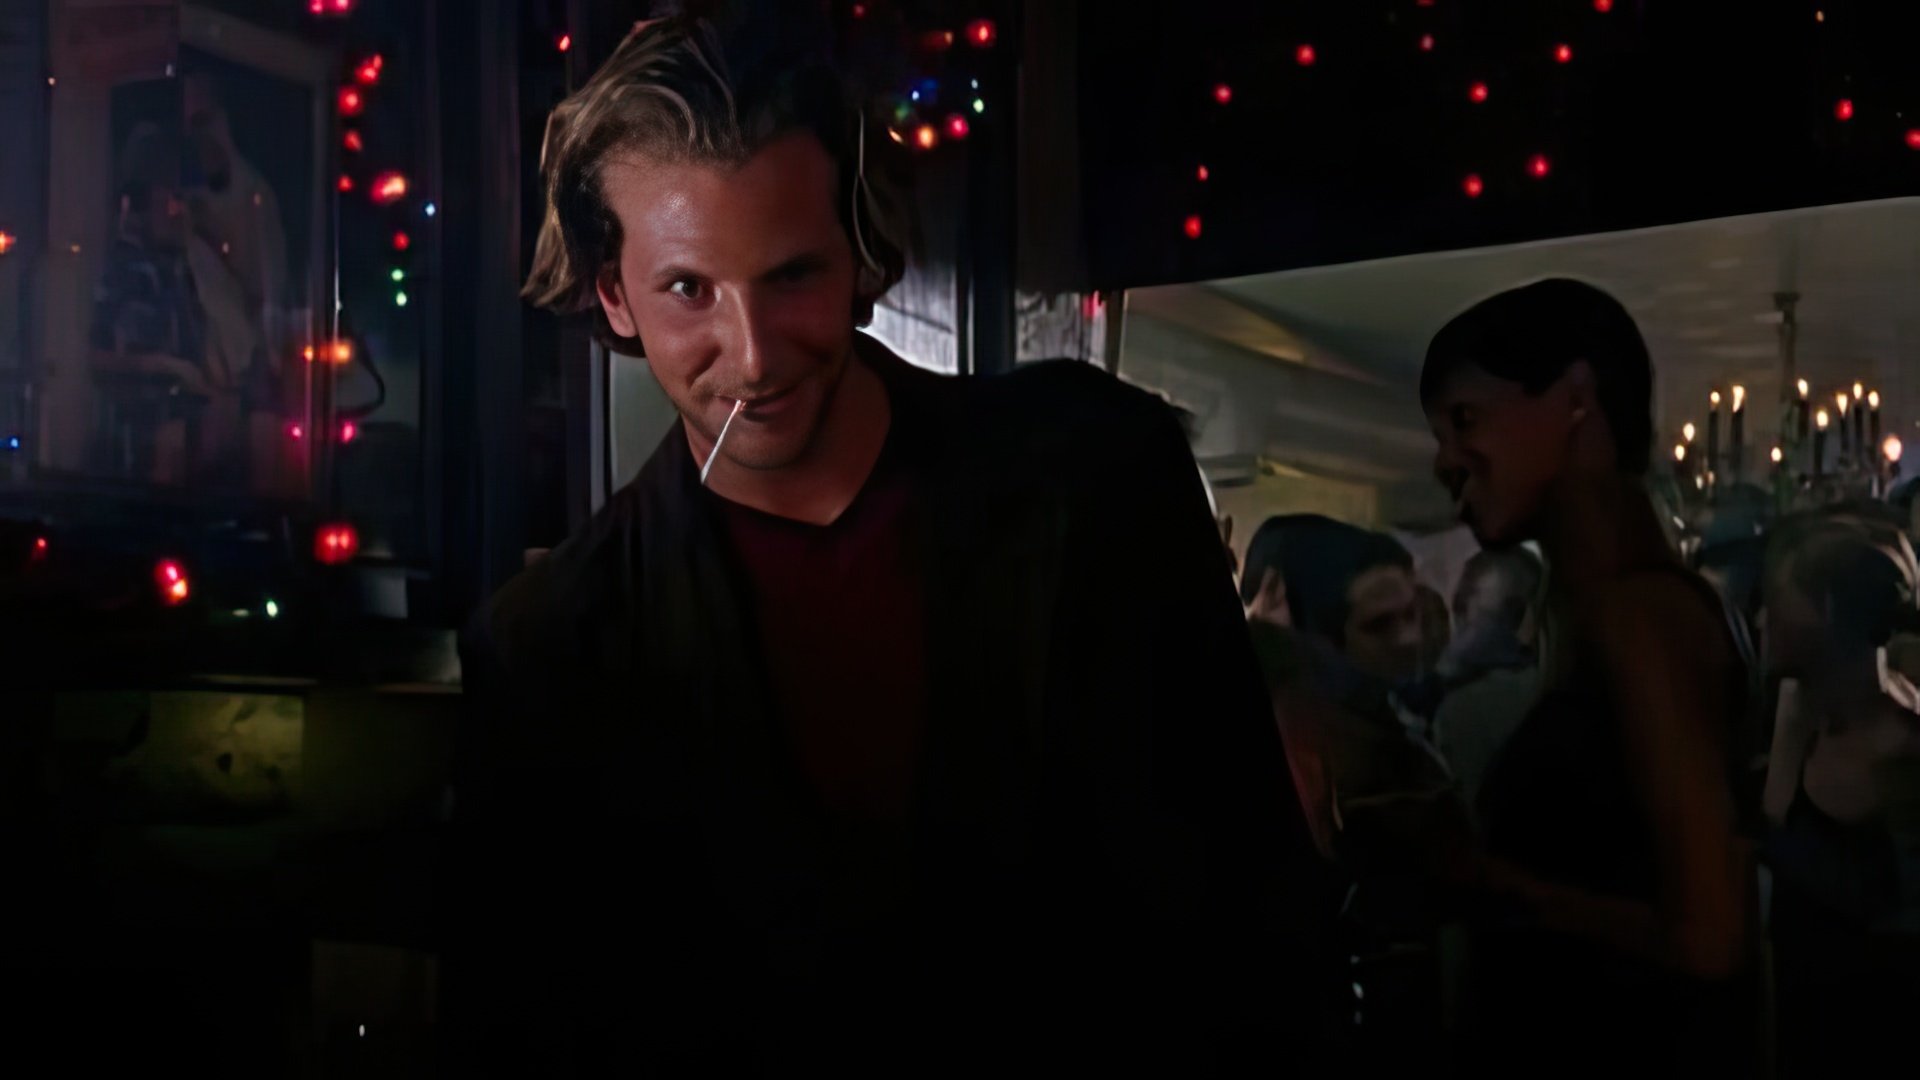 Bradley Cooper's first role (Sex and the City, 1999)